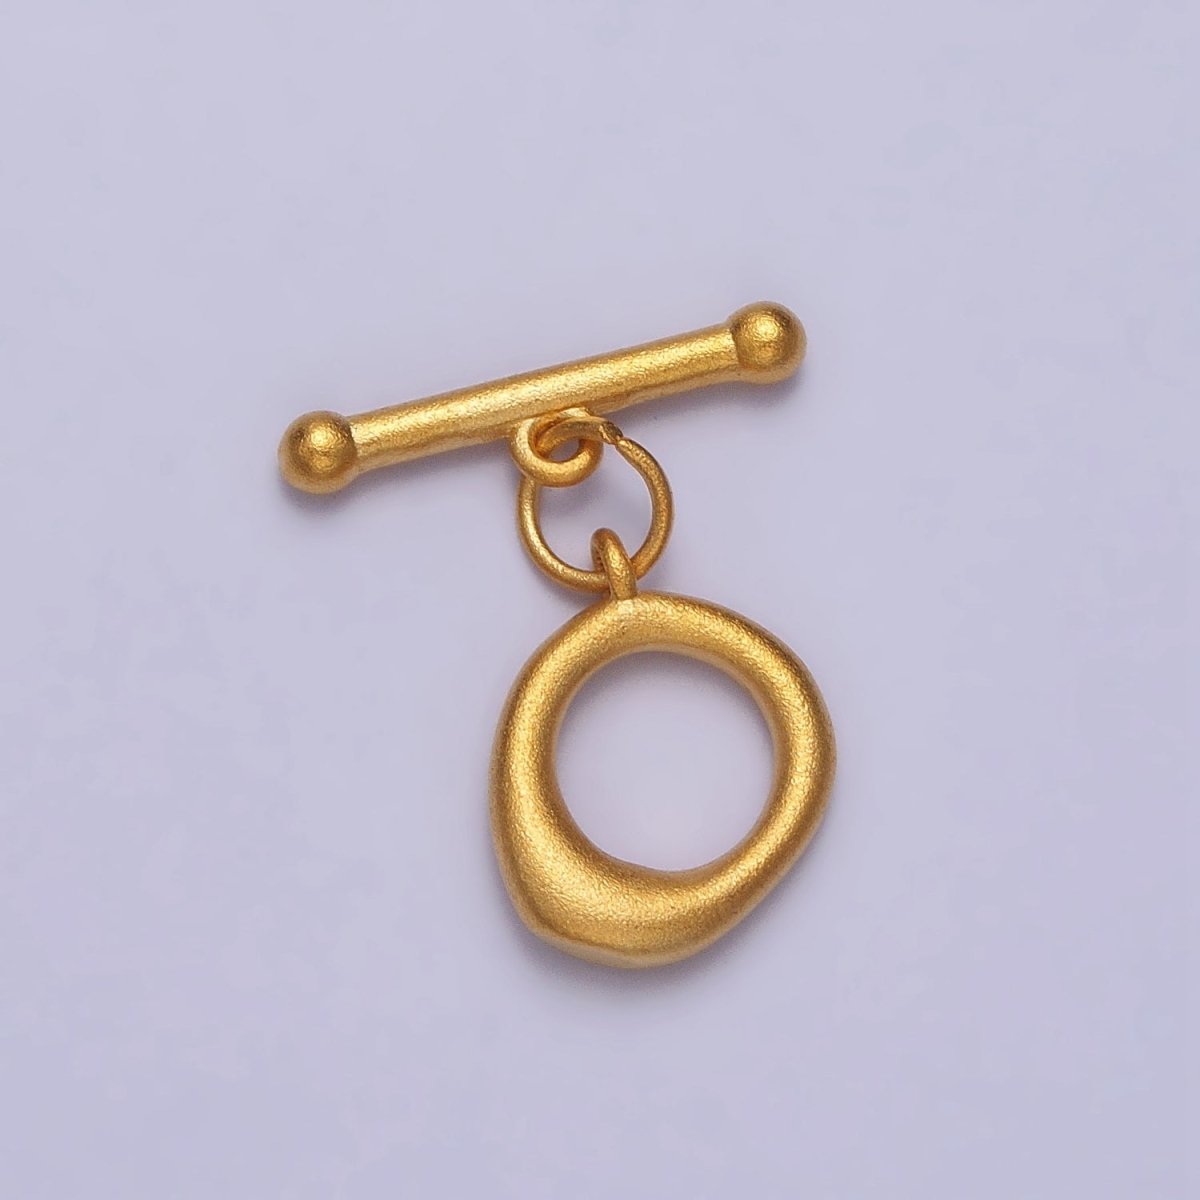 24K Gold Filled Matte Textured Round Geometric Toggle Clasps Jewelry Closure Supply | Z-073 - DLUXCA